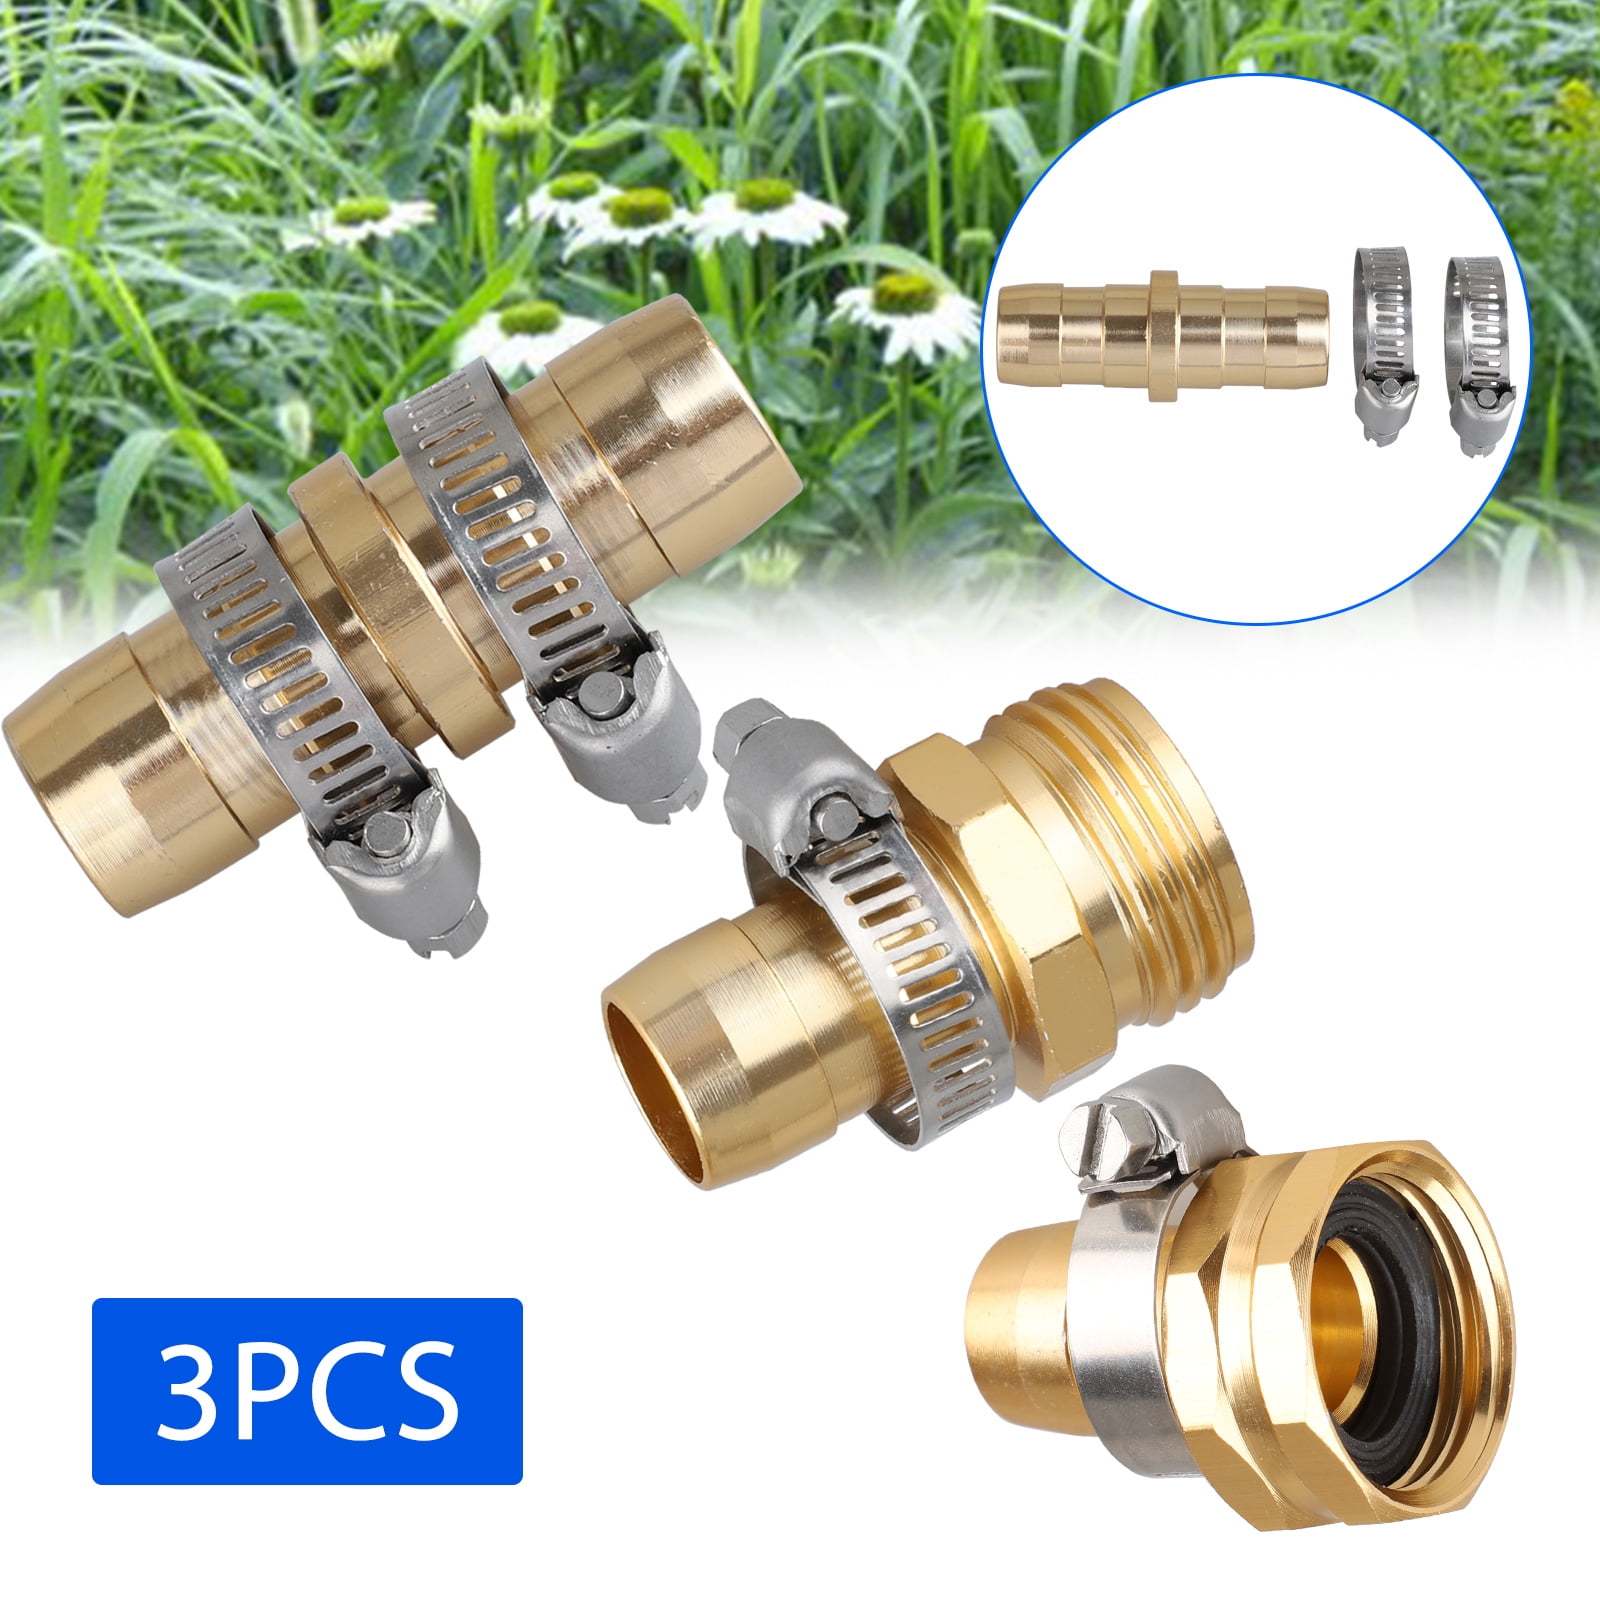 3 Set Uptotop Garden Hose Repair Connectors with Claps Female and Male Garden Hose Fittings for 3/4 & 5/8 Metal Garden Hose Repair Kit 